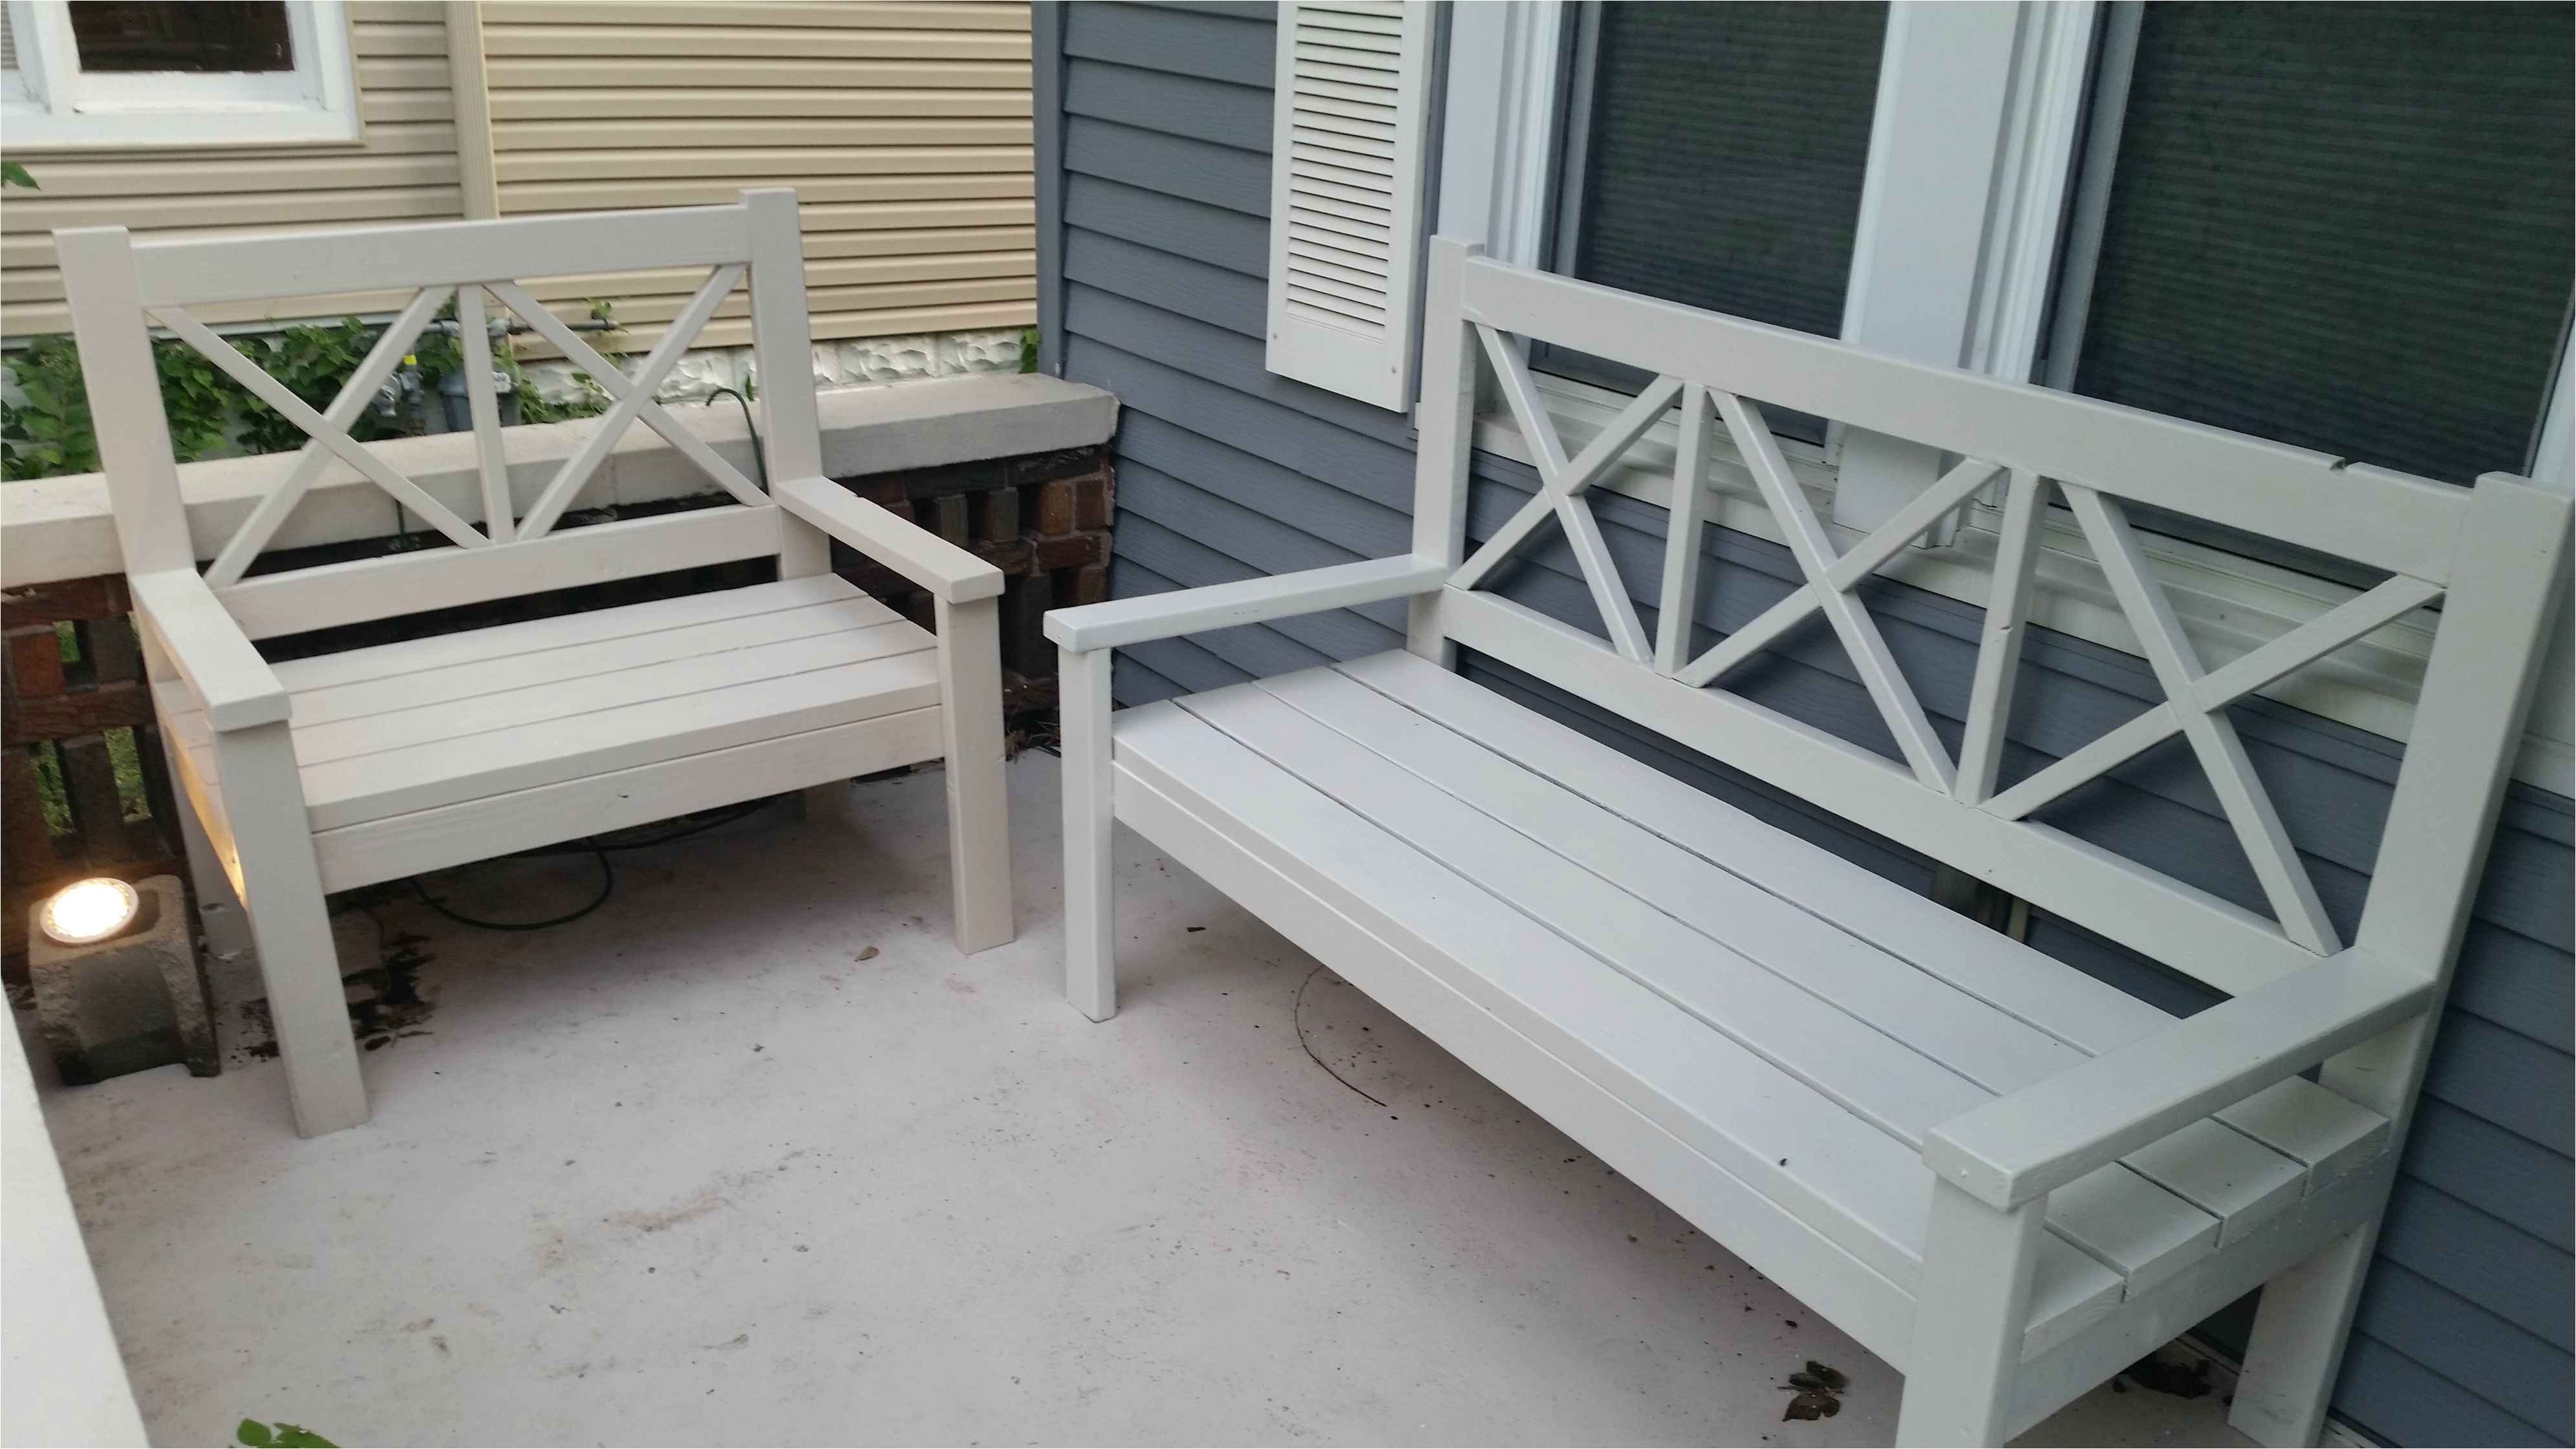 bench how to build outdoorod benches diy bench plans patio home design excellent white 86